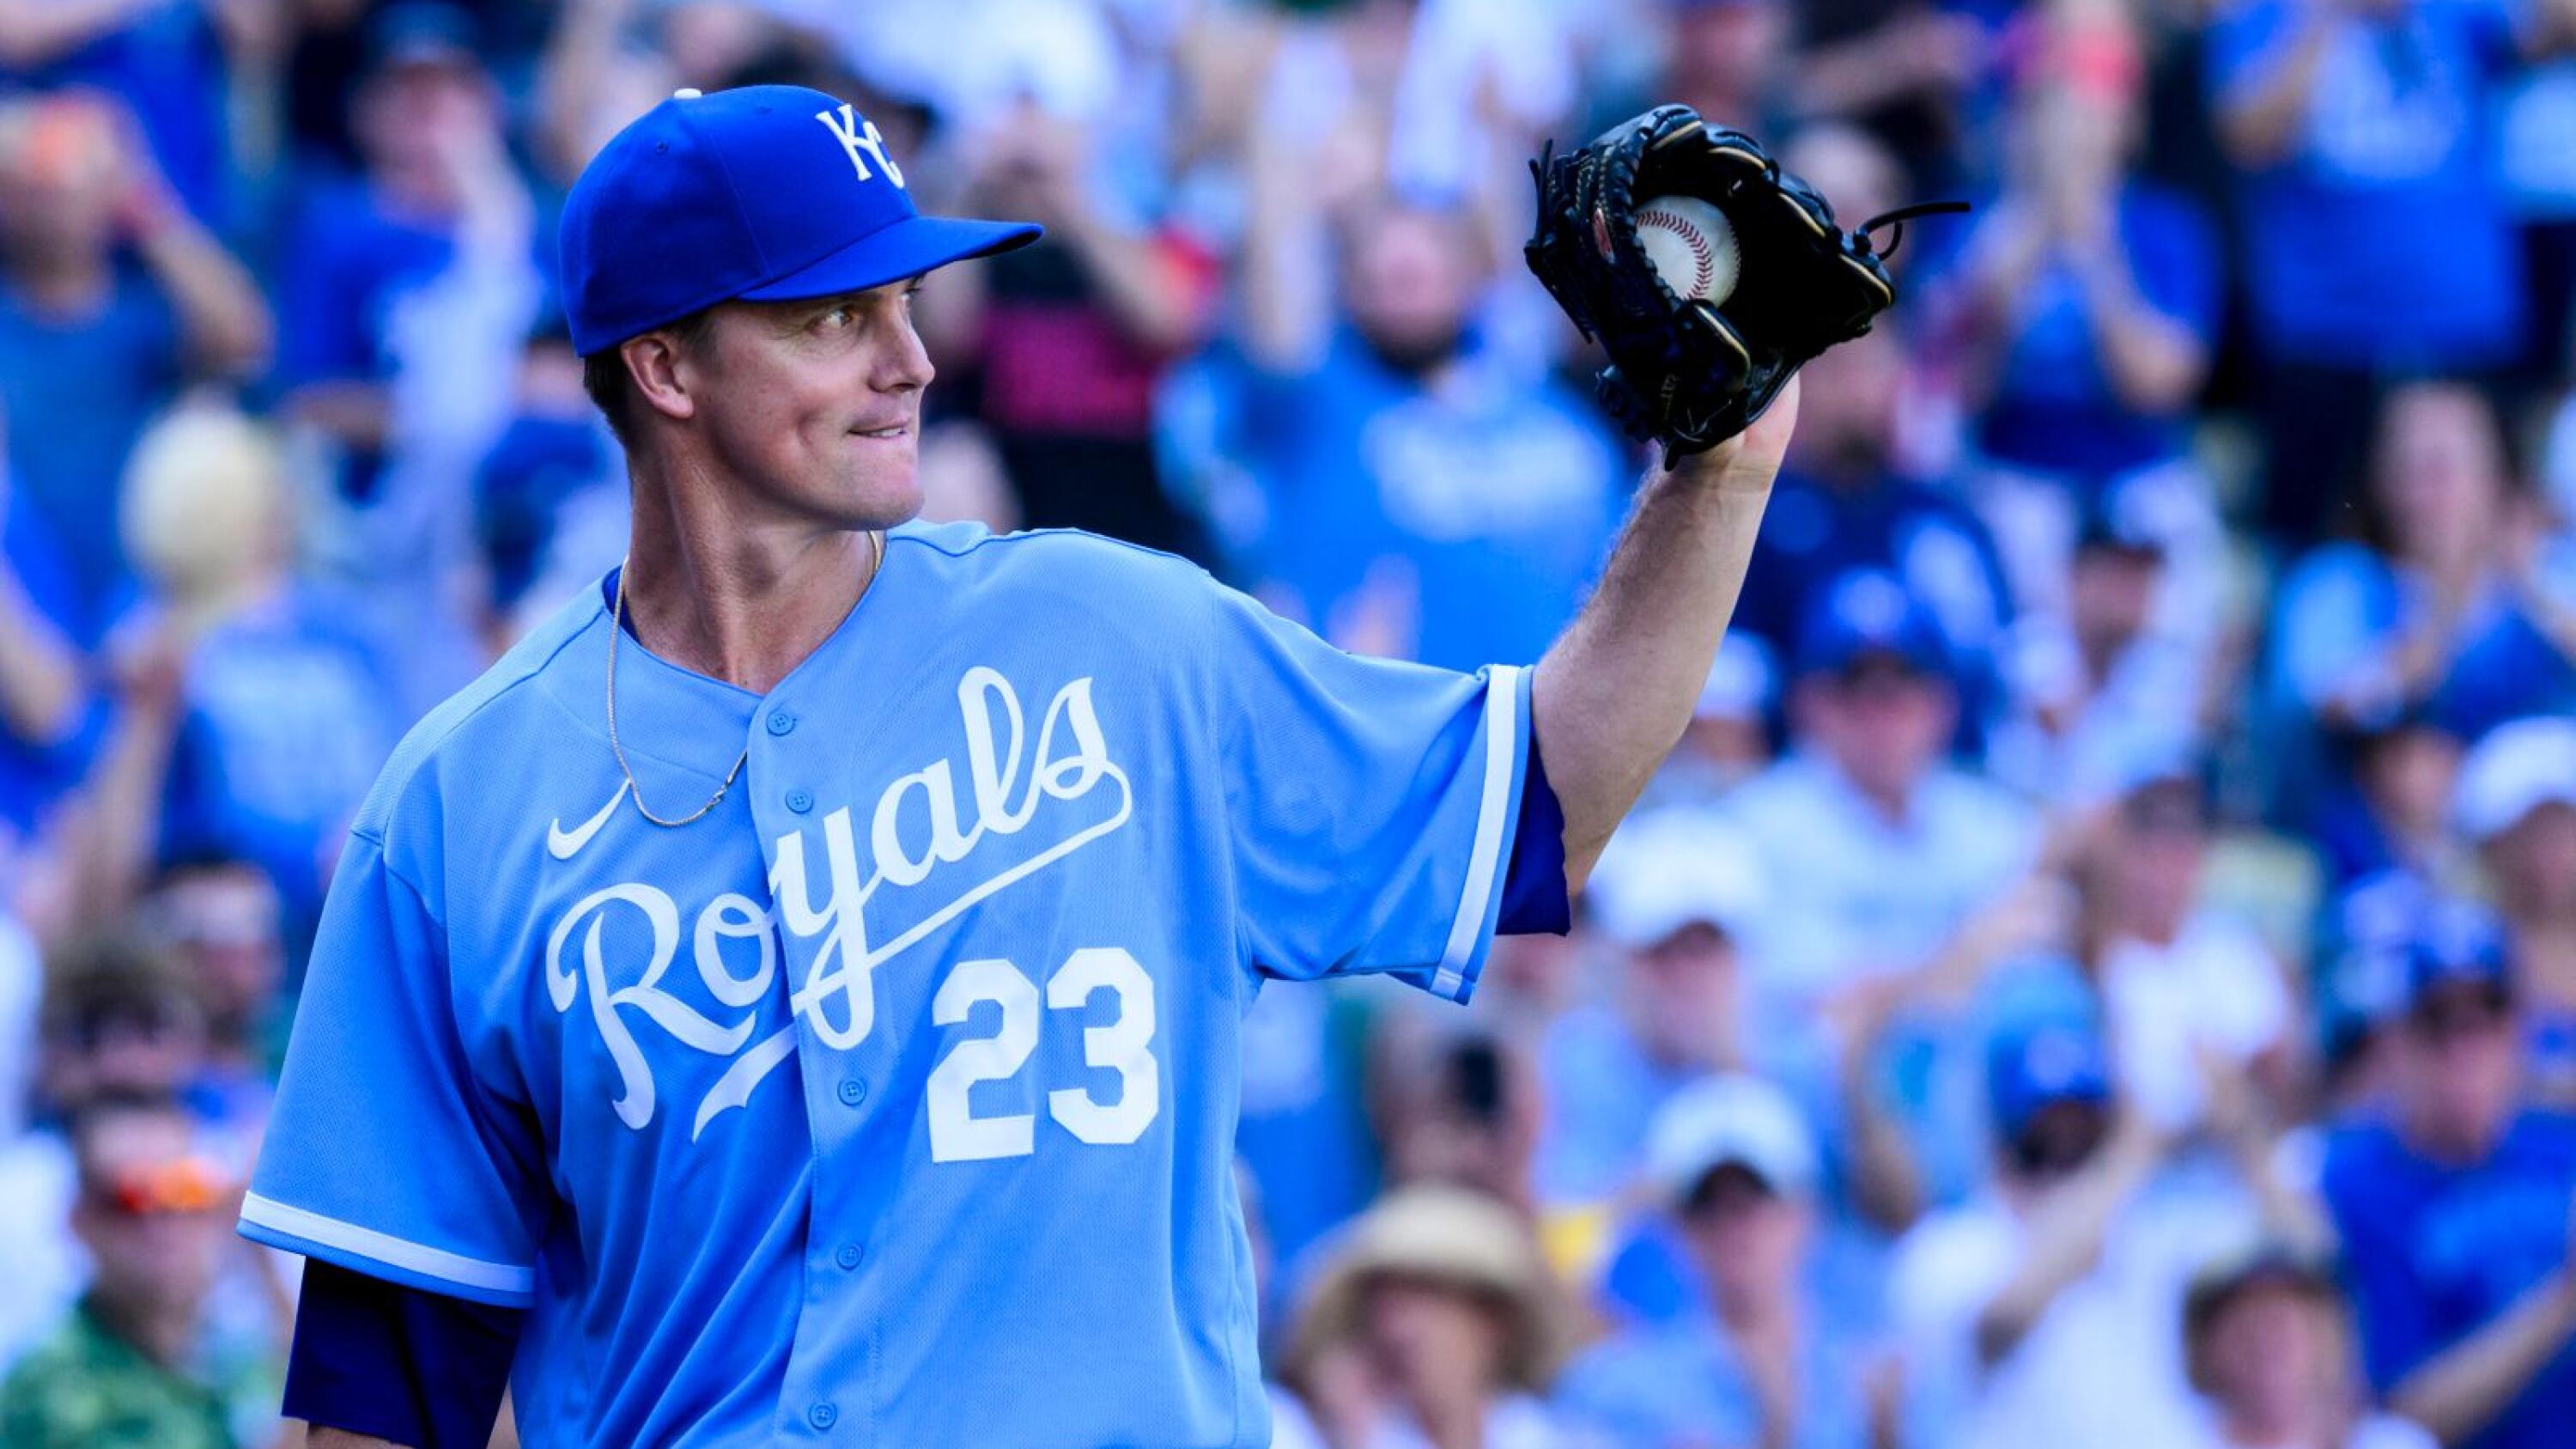 ⚾ Greinke pitches Royals to win over Yankees in what could be his